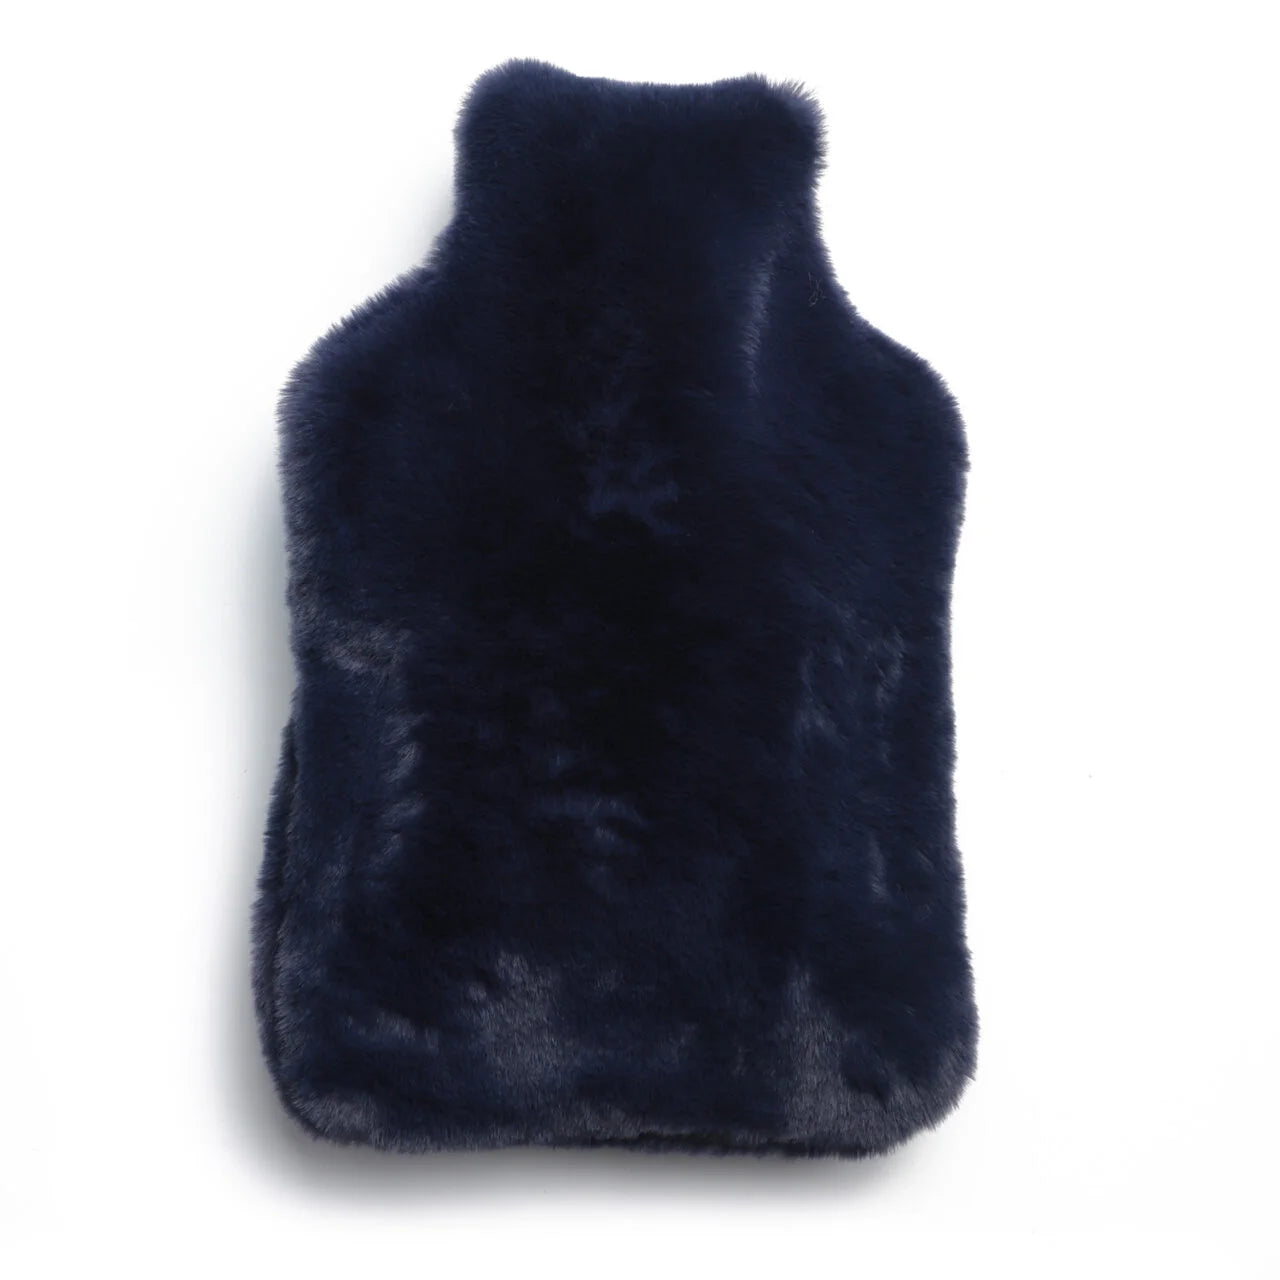 Fab Gifts | Winter Accessories Faux Fur Hot Water Bottle Cover Navy by Weirs of Baggot Street